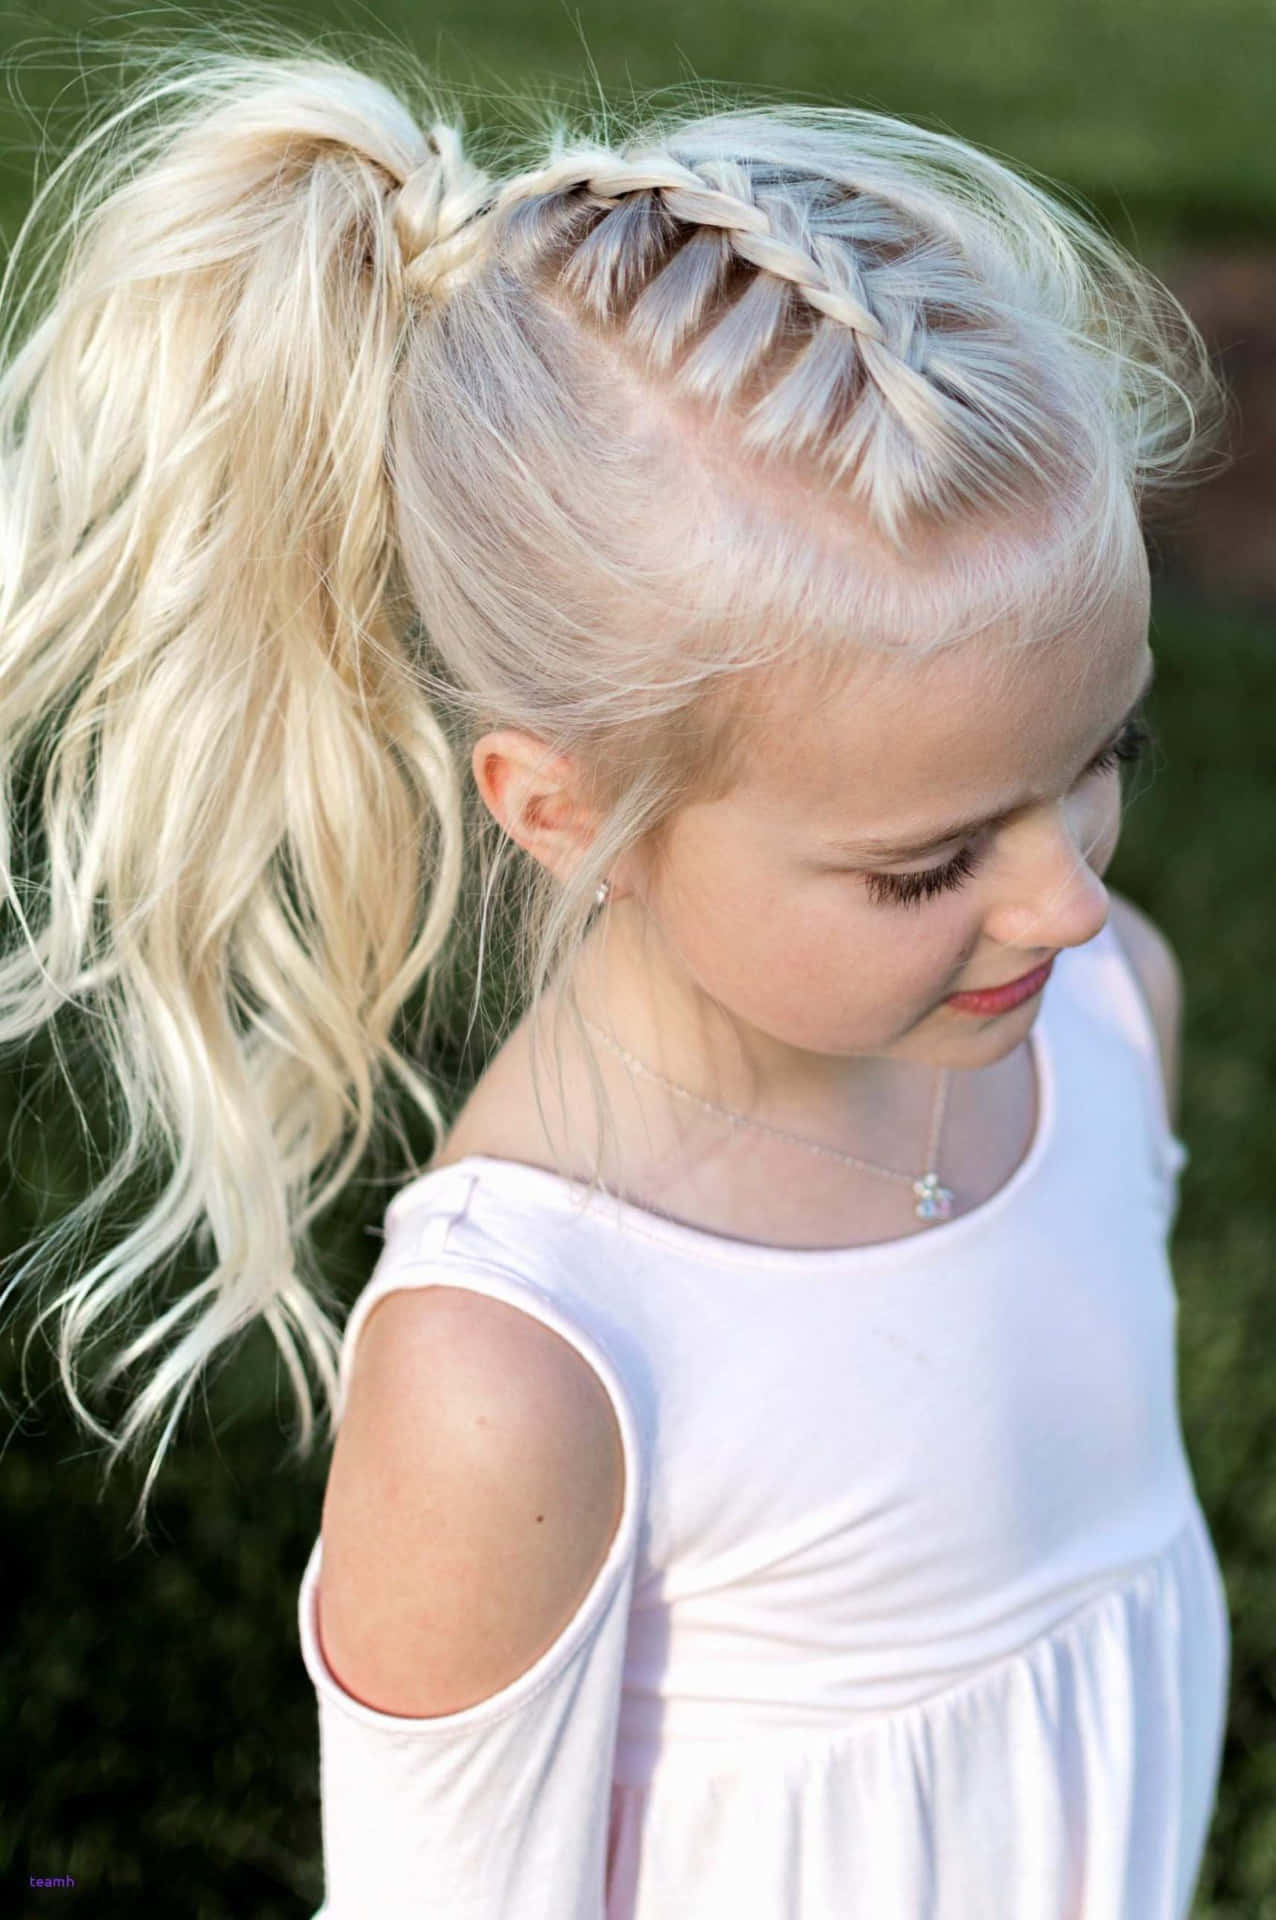 Kids Braid Cute Hairstyle Picture